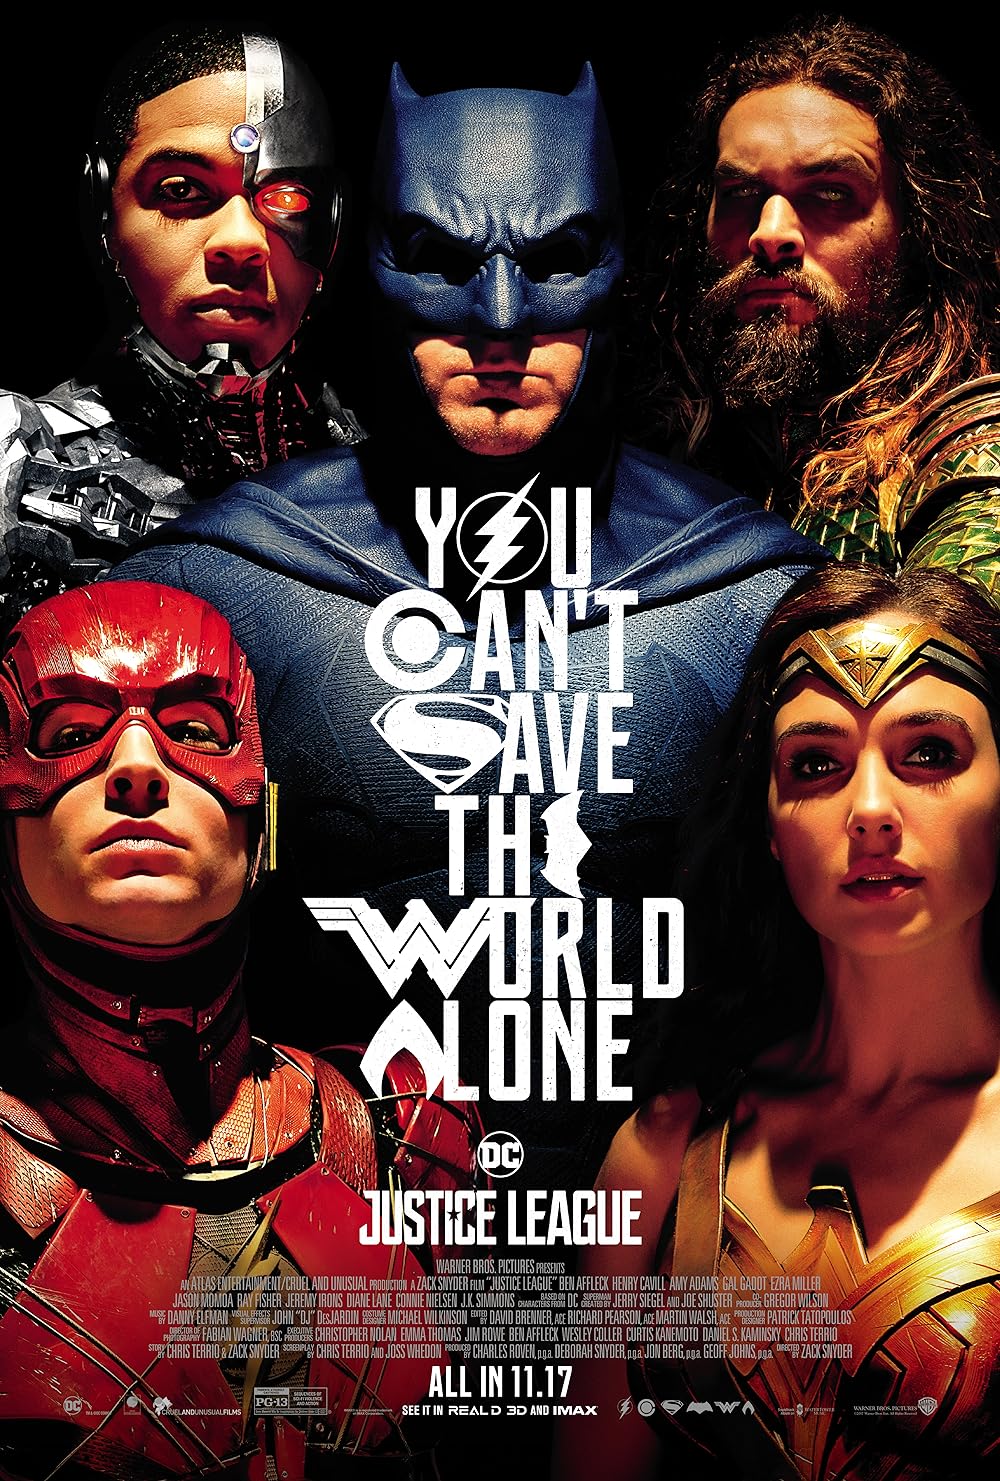 chad boone recommends The Justice League Xxx